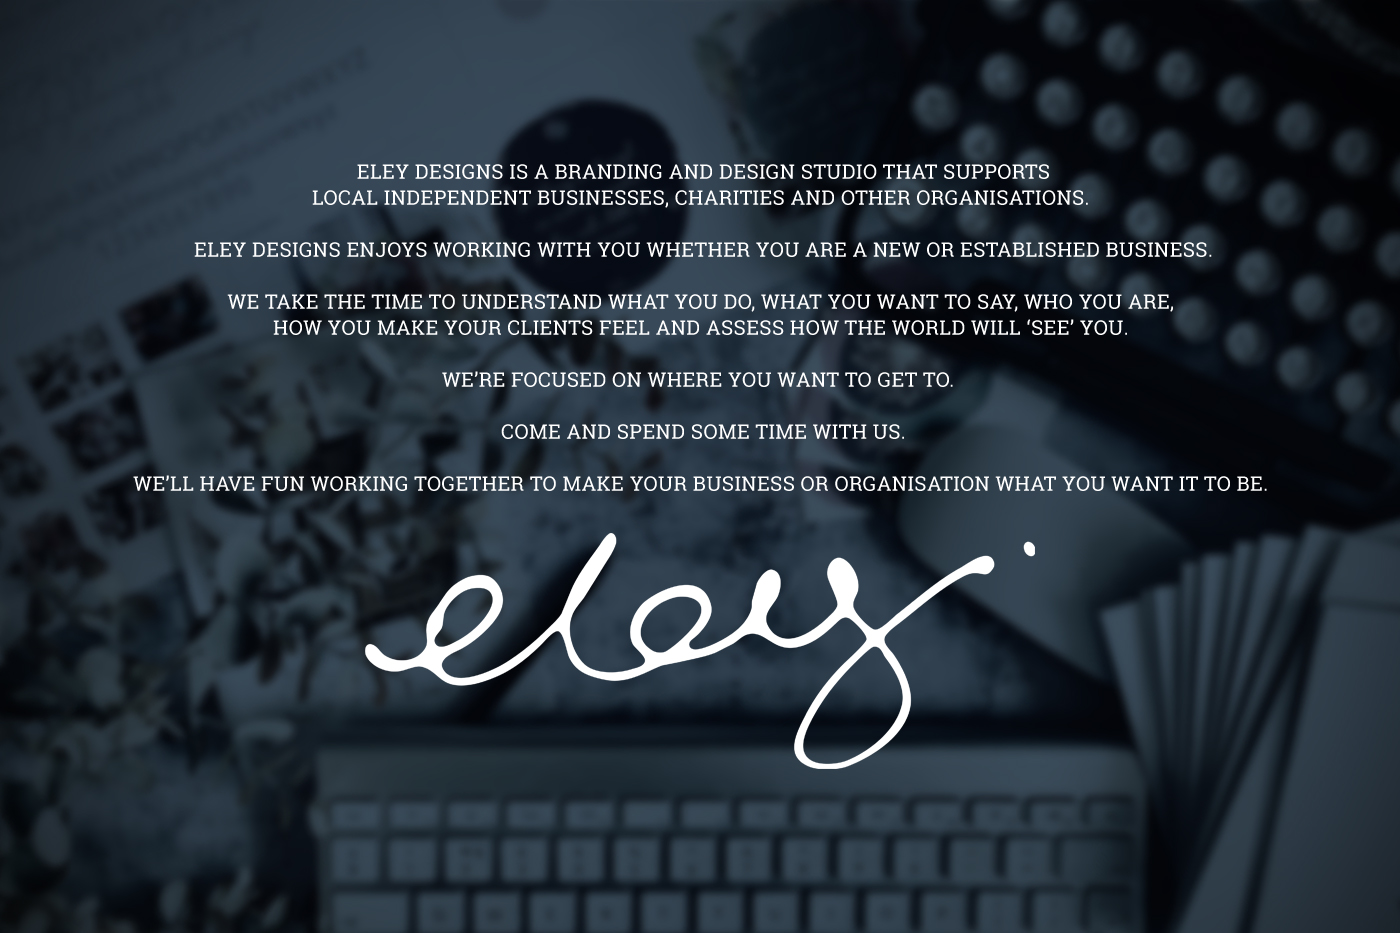 About Eley Designs